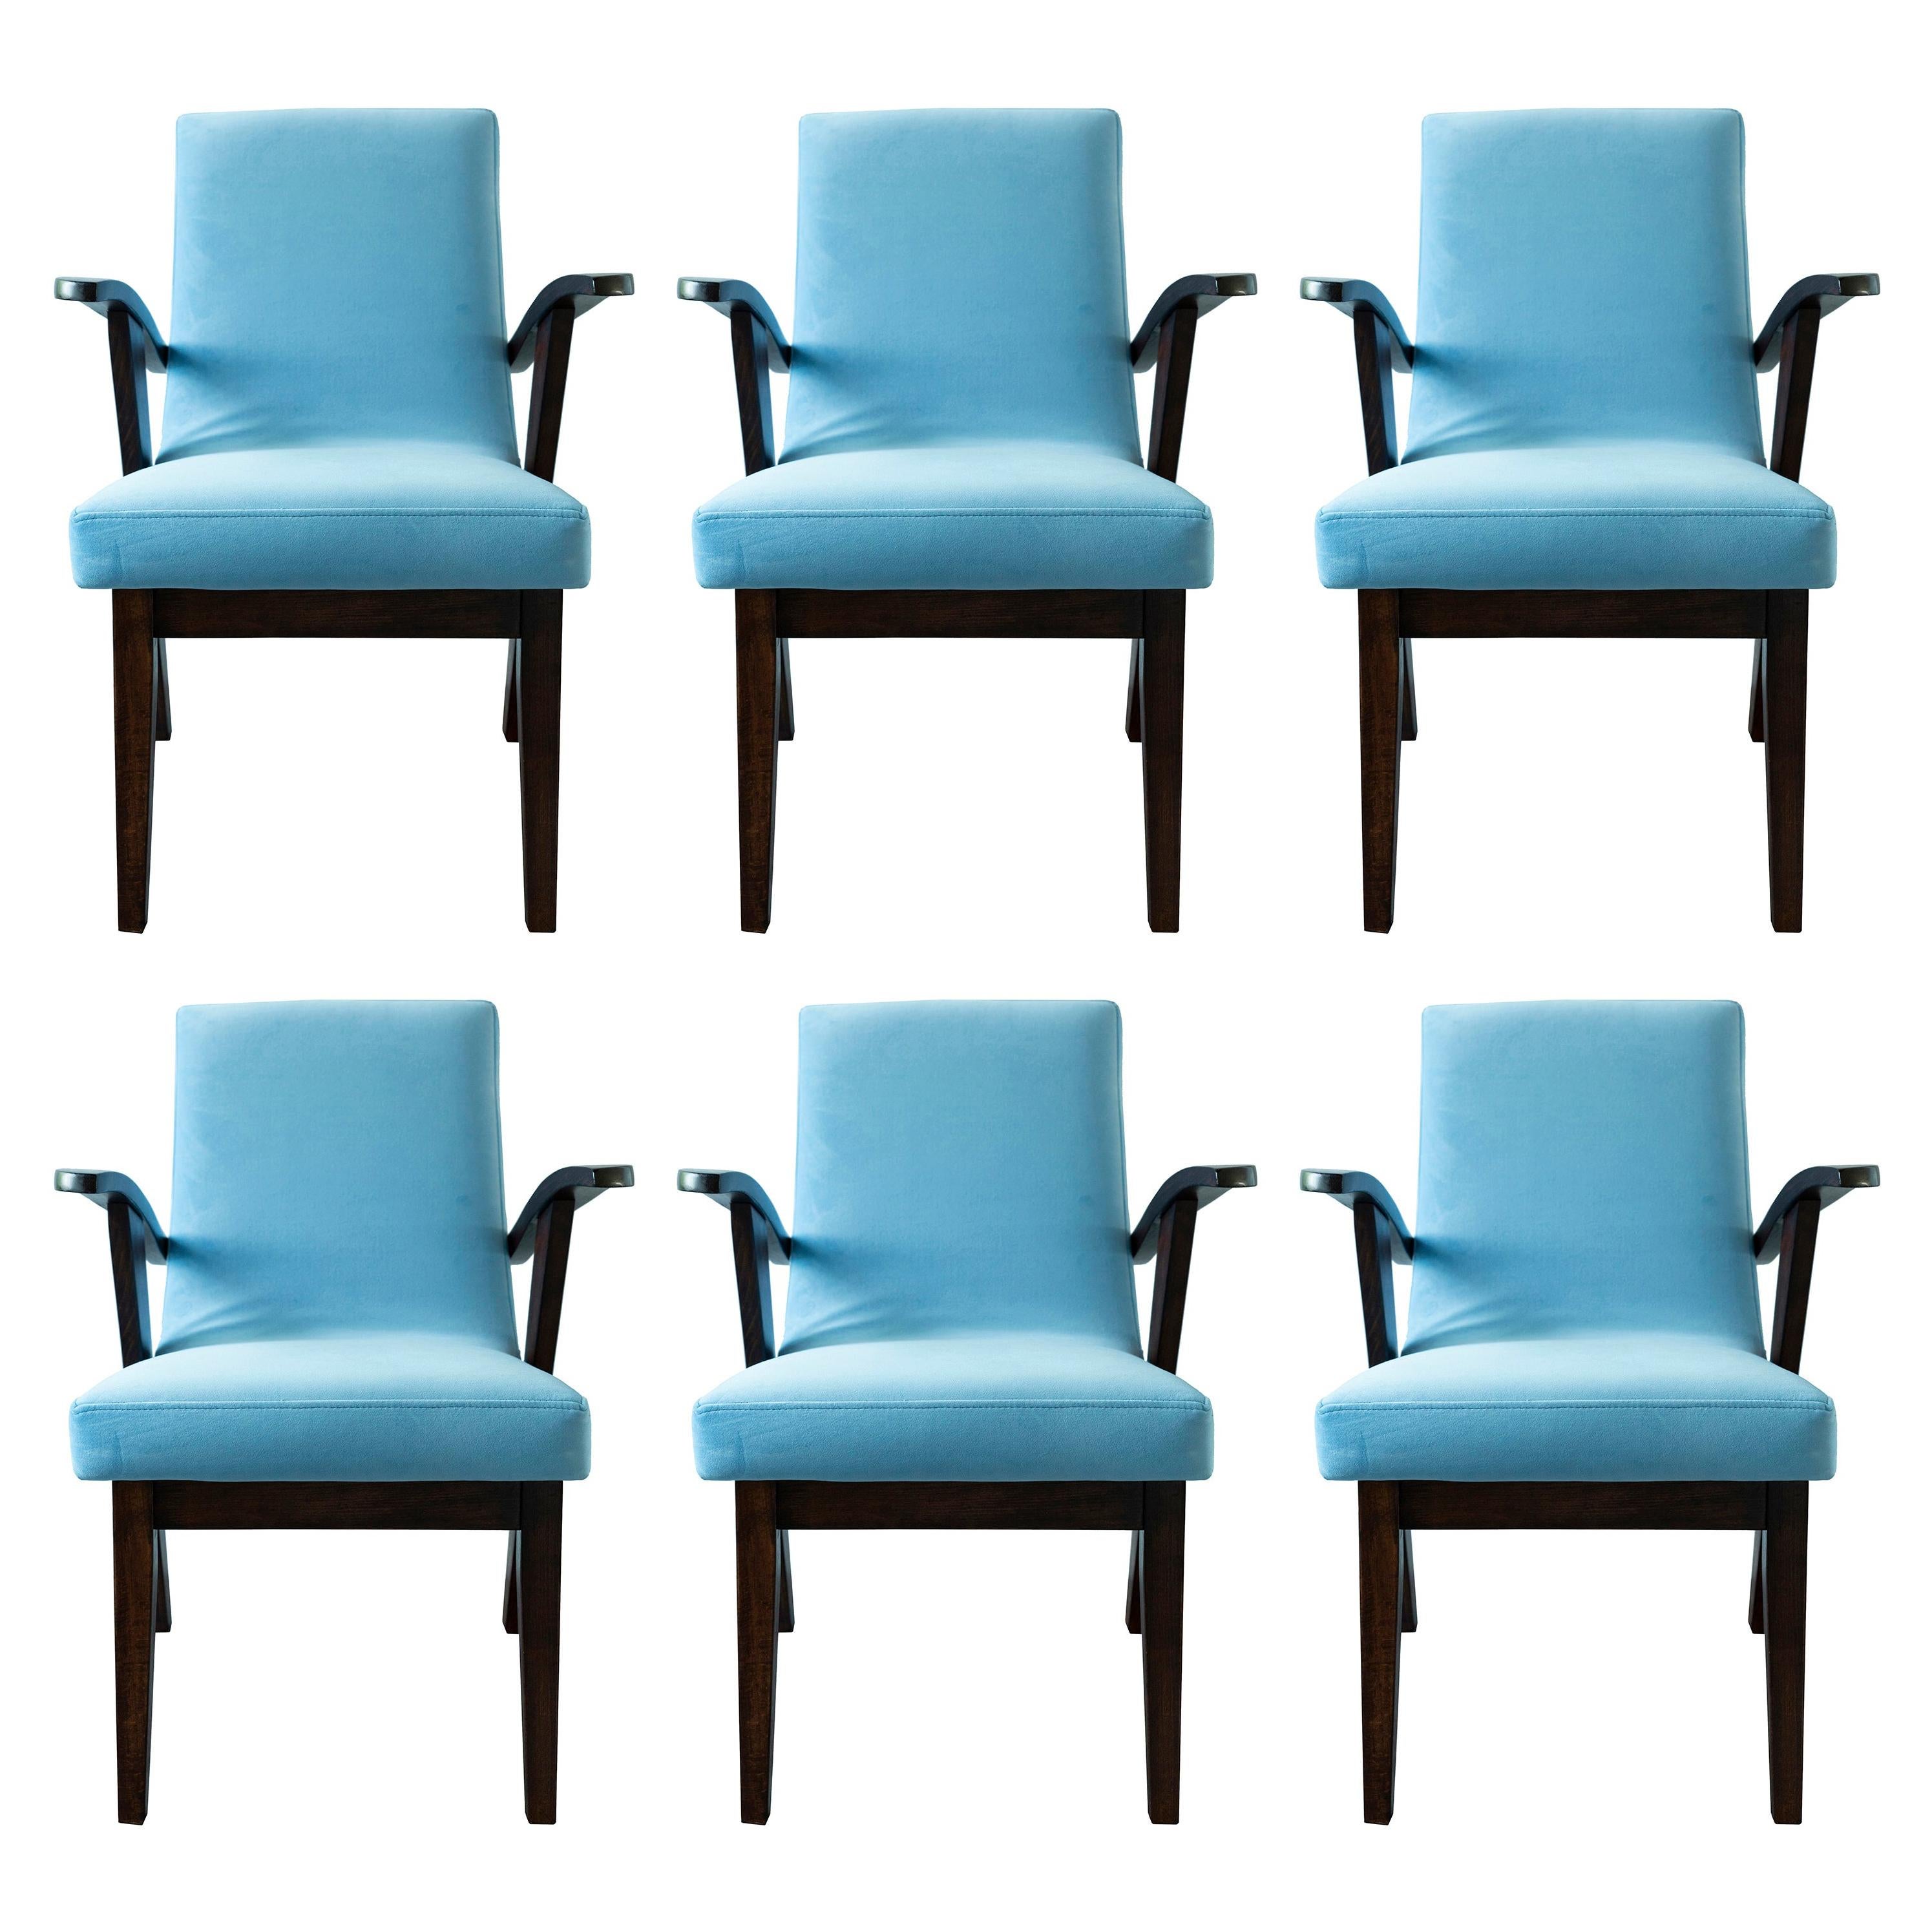 Set of Six 20th Century Armchairs in Baby Blue Velvet, Mieczyslaw Puchala, 1960s For Sale